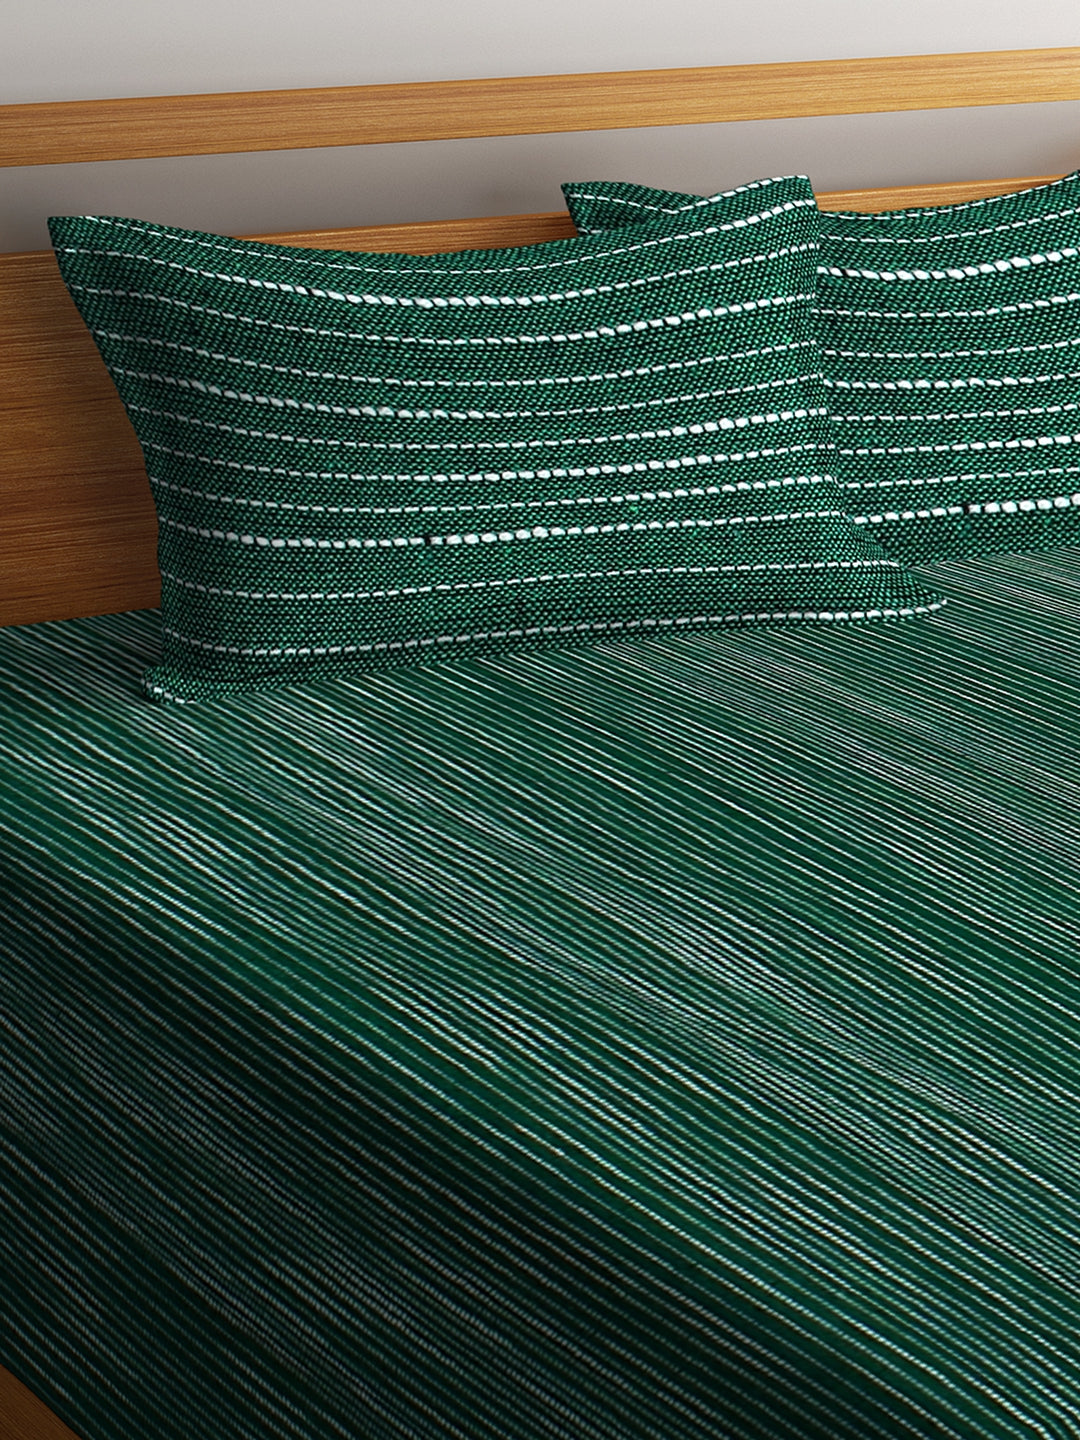 100% Pure Cotton King Size Handwoven Bed Cover with Two Pillow Covers by KLOTTHE® (Green)